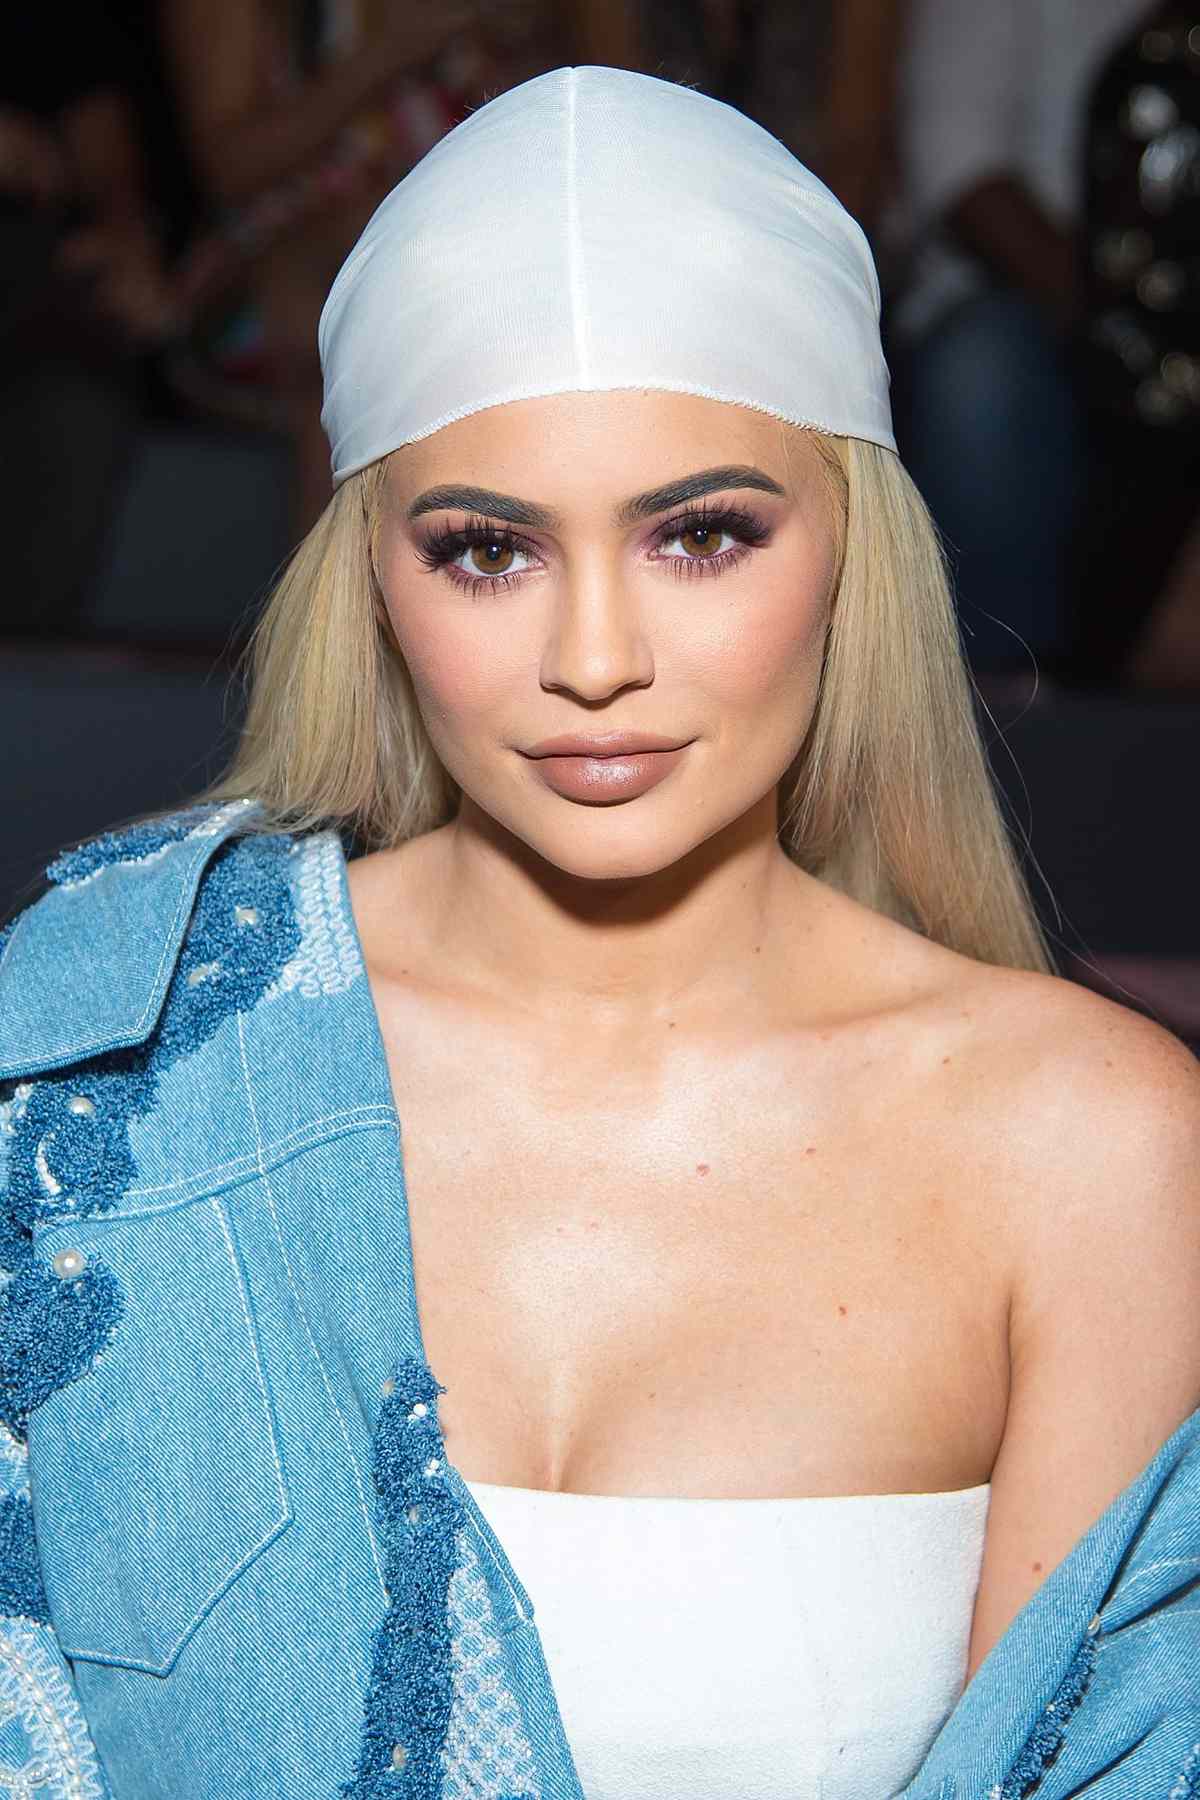 Kylie Jenner's Eyeshadow Palette Is Allegedly Giving People Headaches